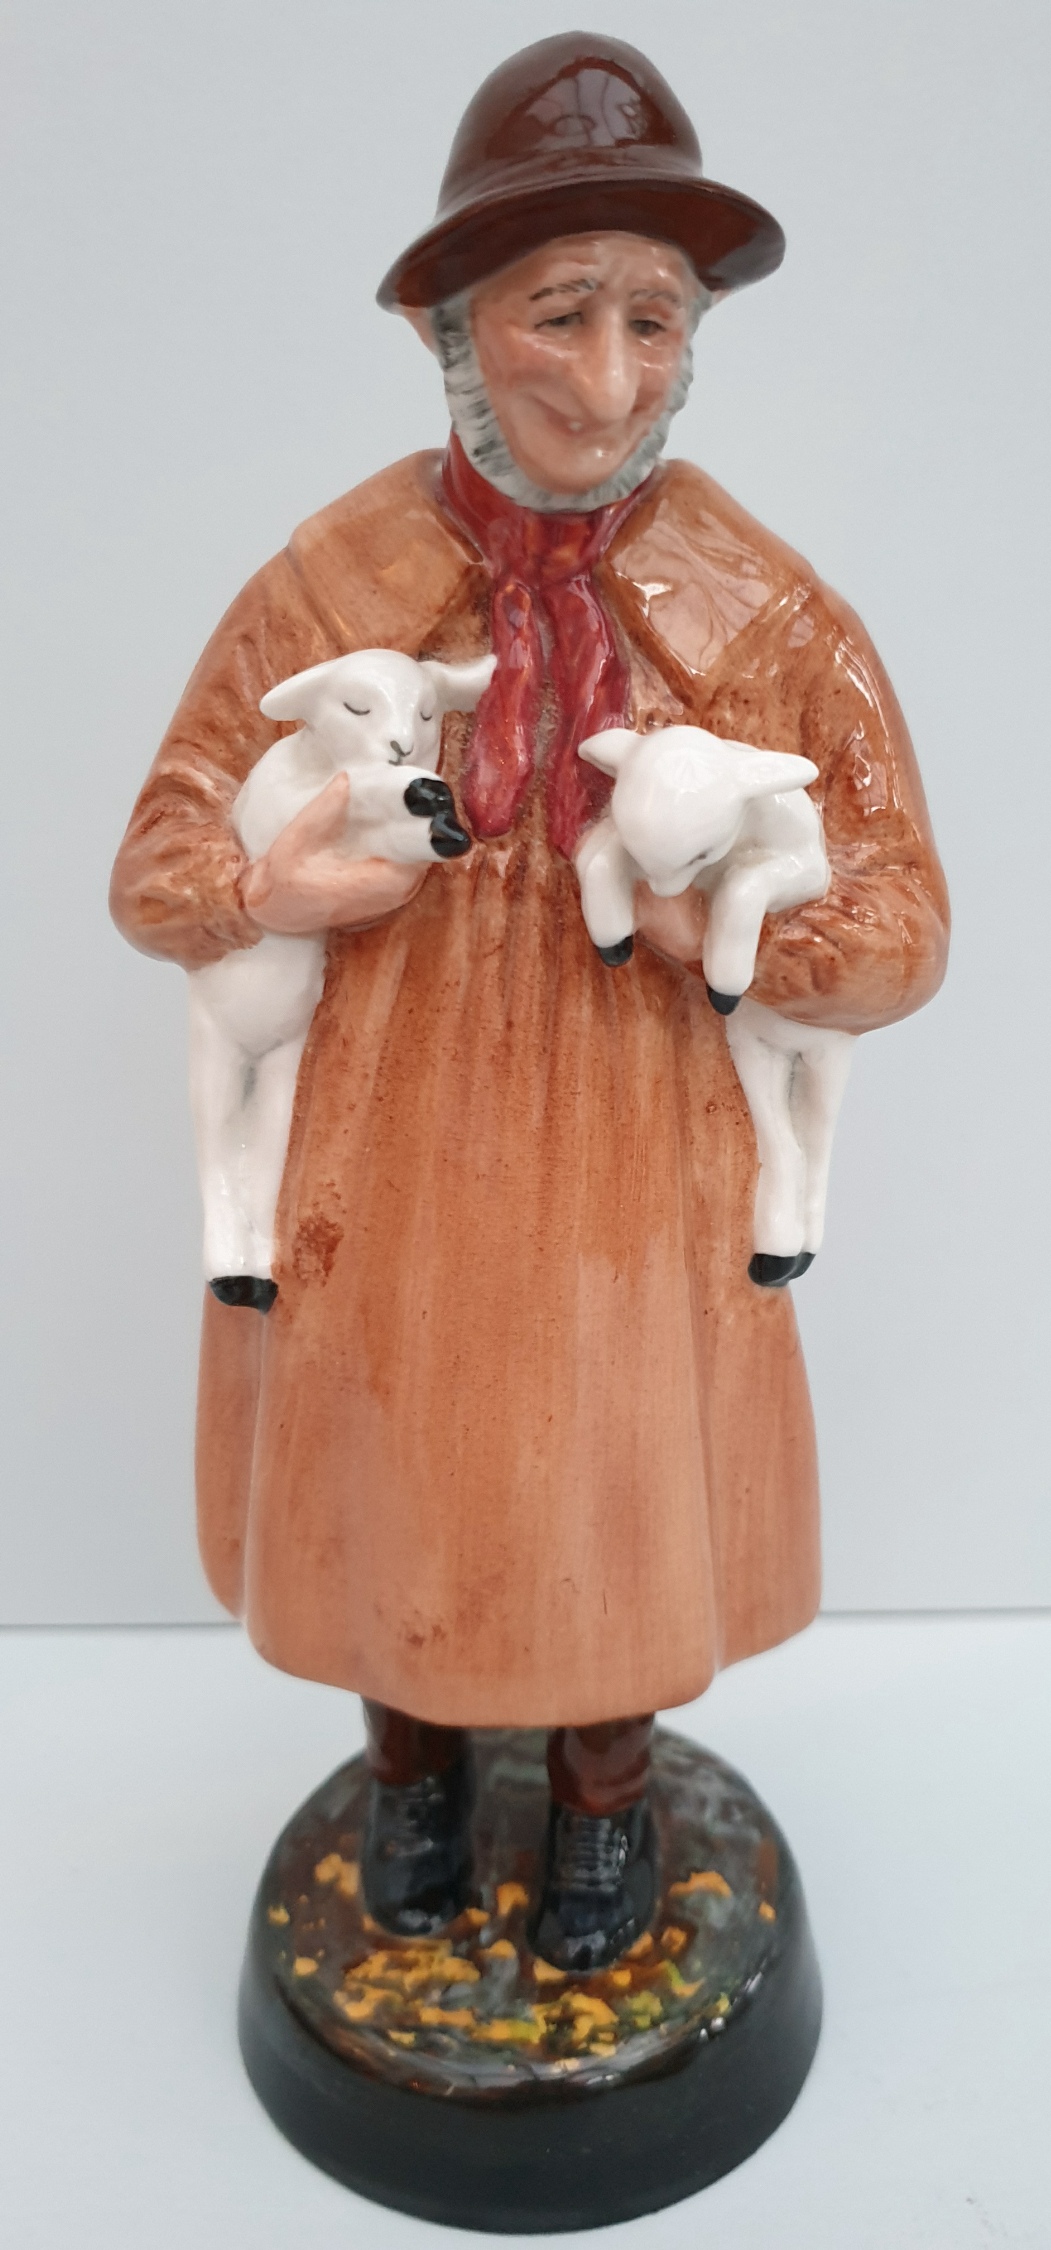 Vintage Collectable Royal Doulton Figurine Lambing Time HN 1890 Stands 9 inches Tall. Part of a